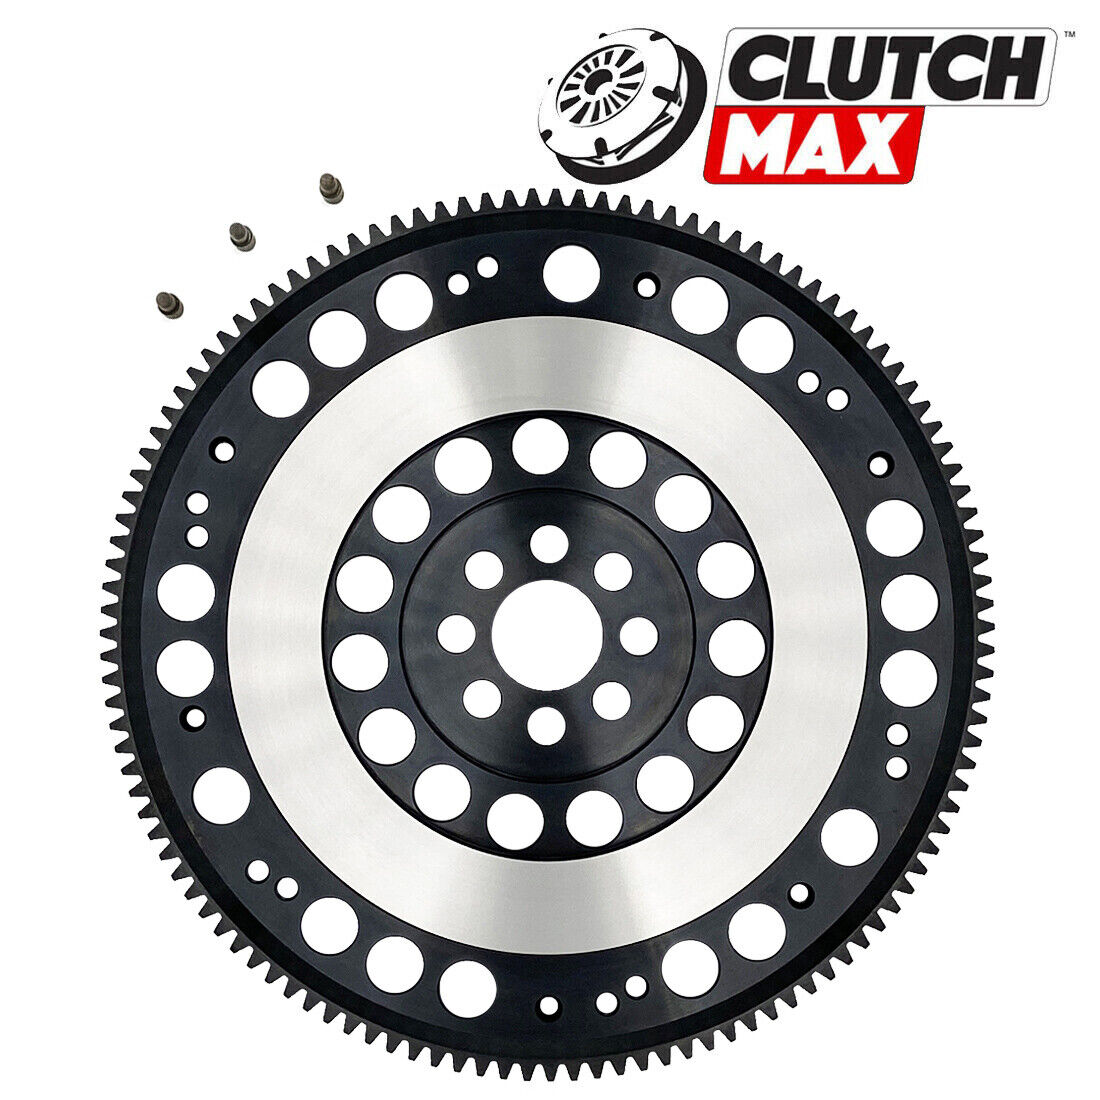 RACE PERFORMANCE CLUTCH FLYWHEEL for ACURA RSX TYPE-S CIVIC Si 6-SPEED K20 iVTEC